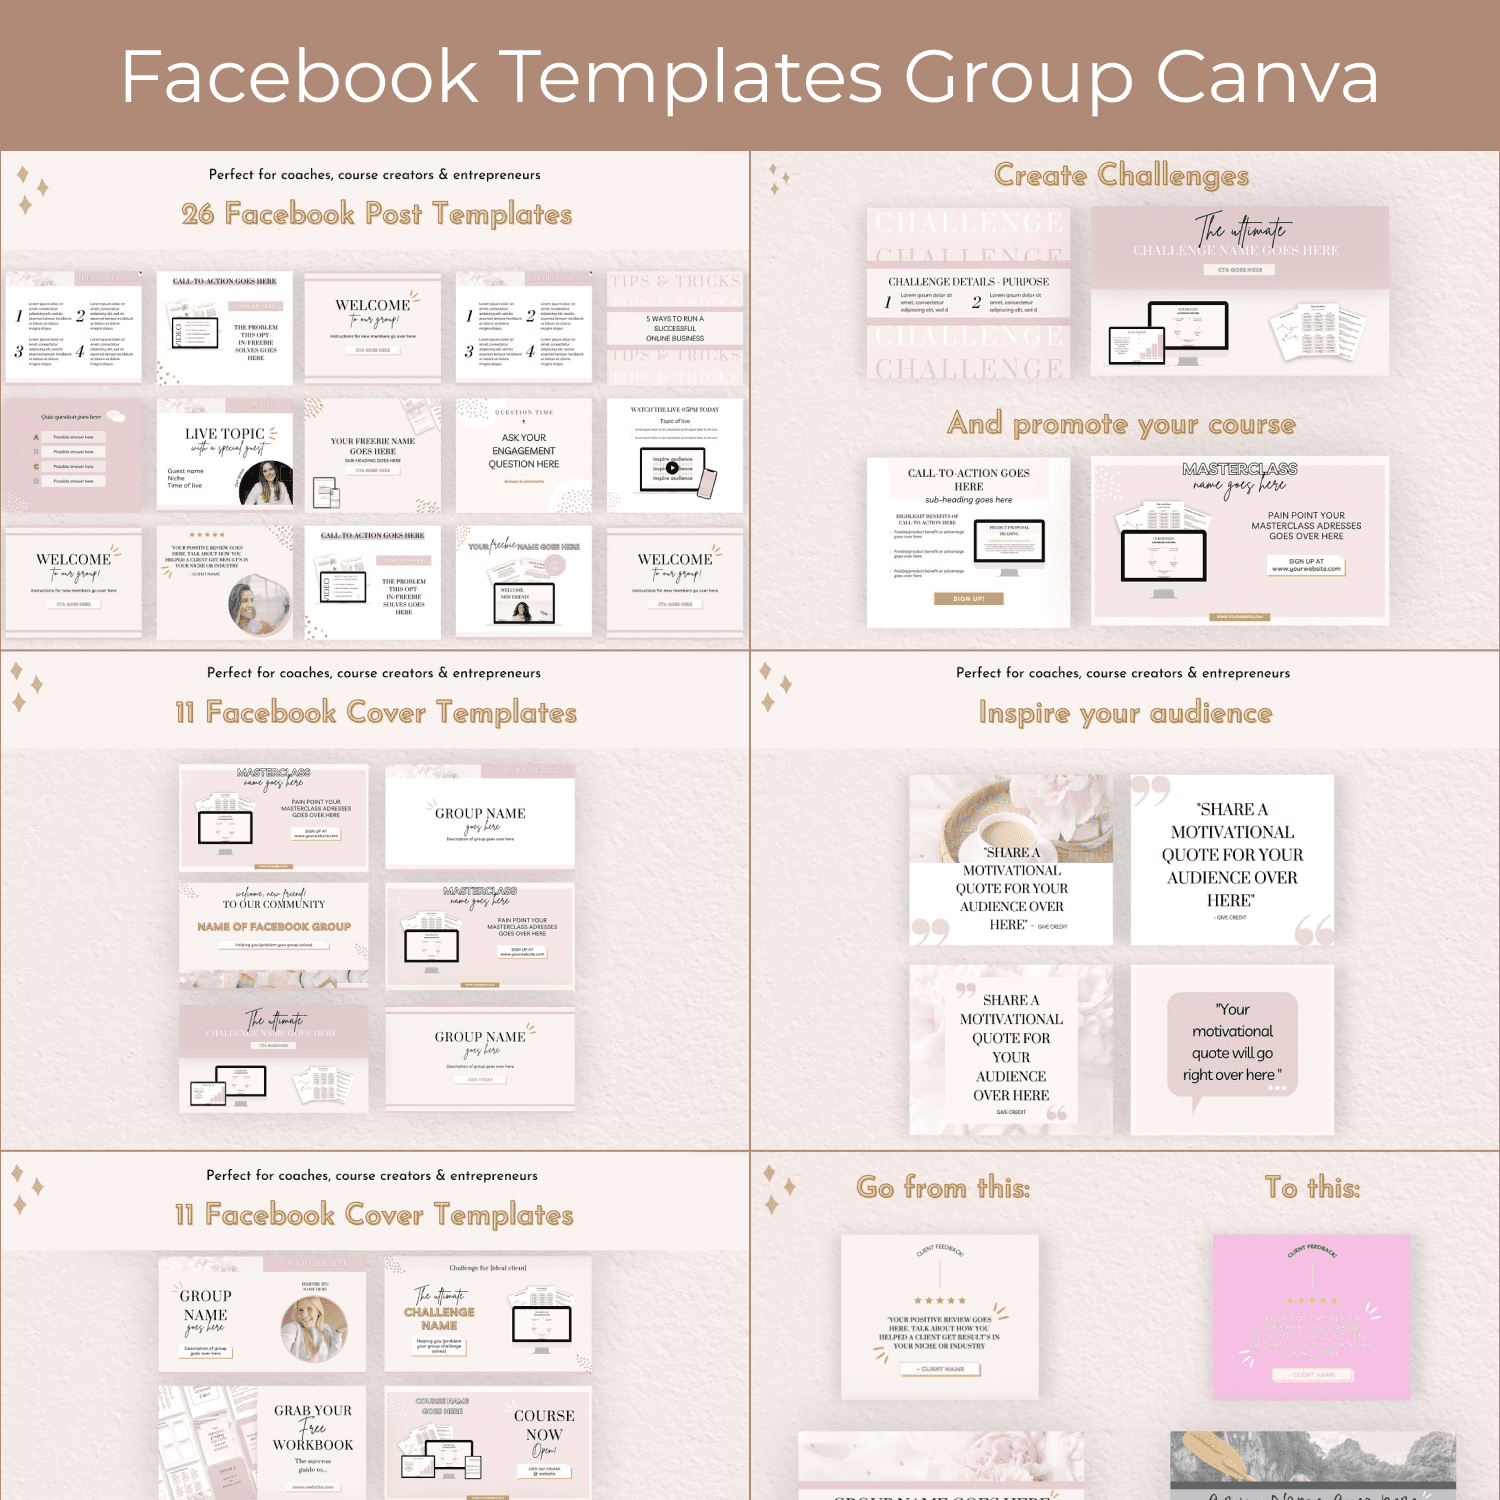 Facebook Templates Group Canva main cover.